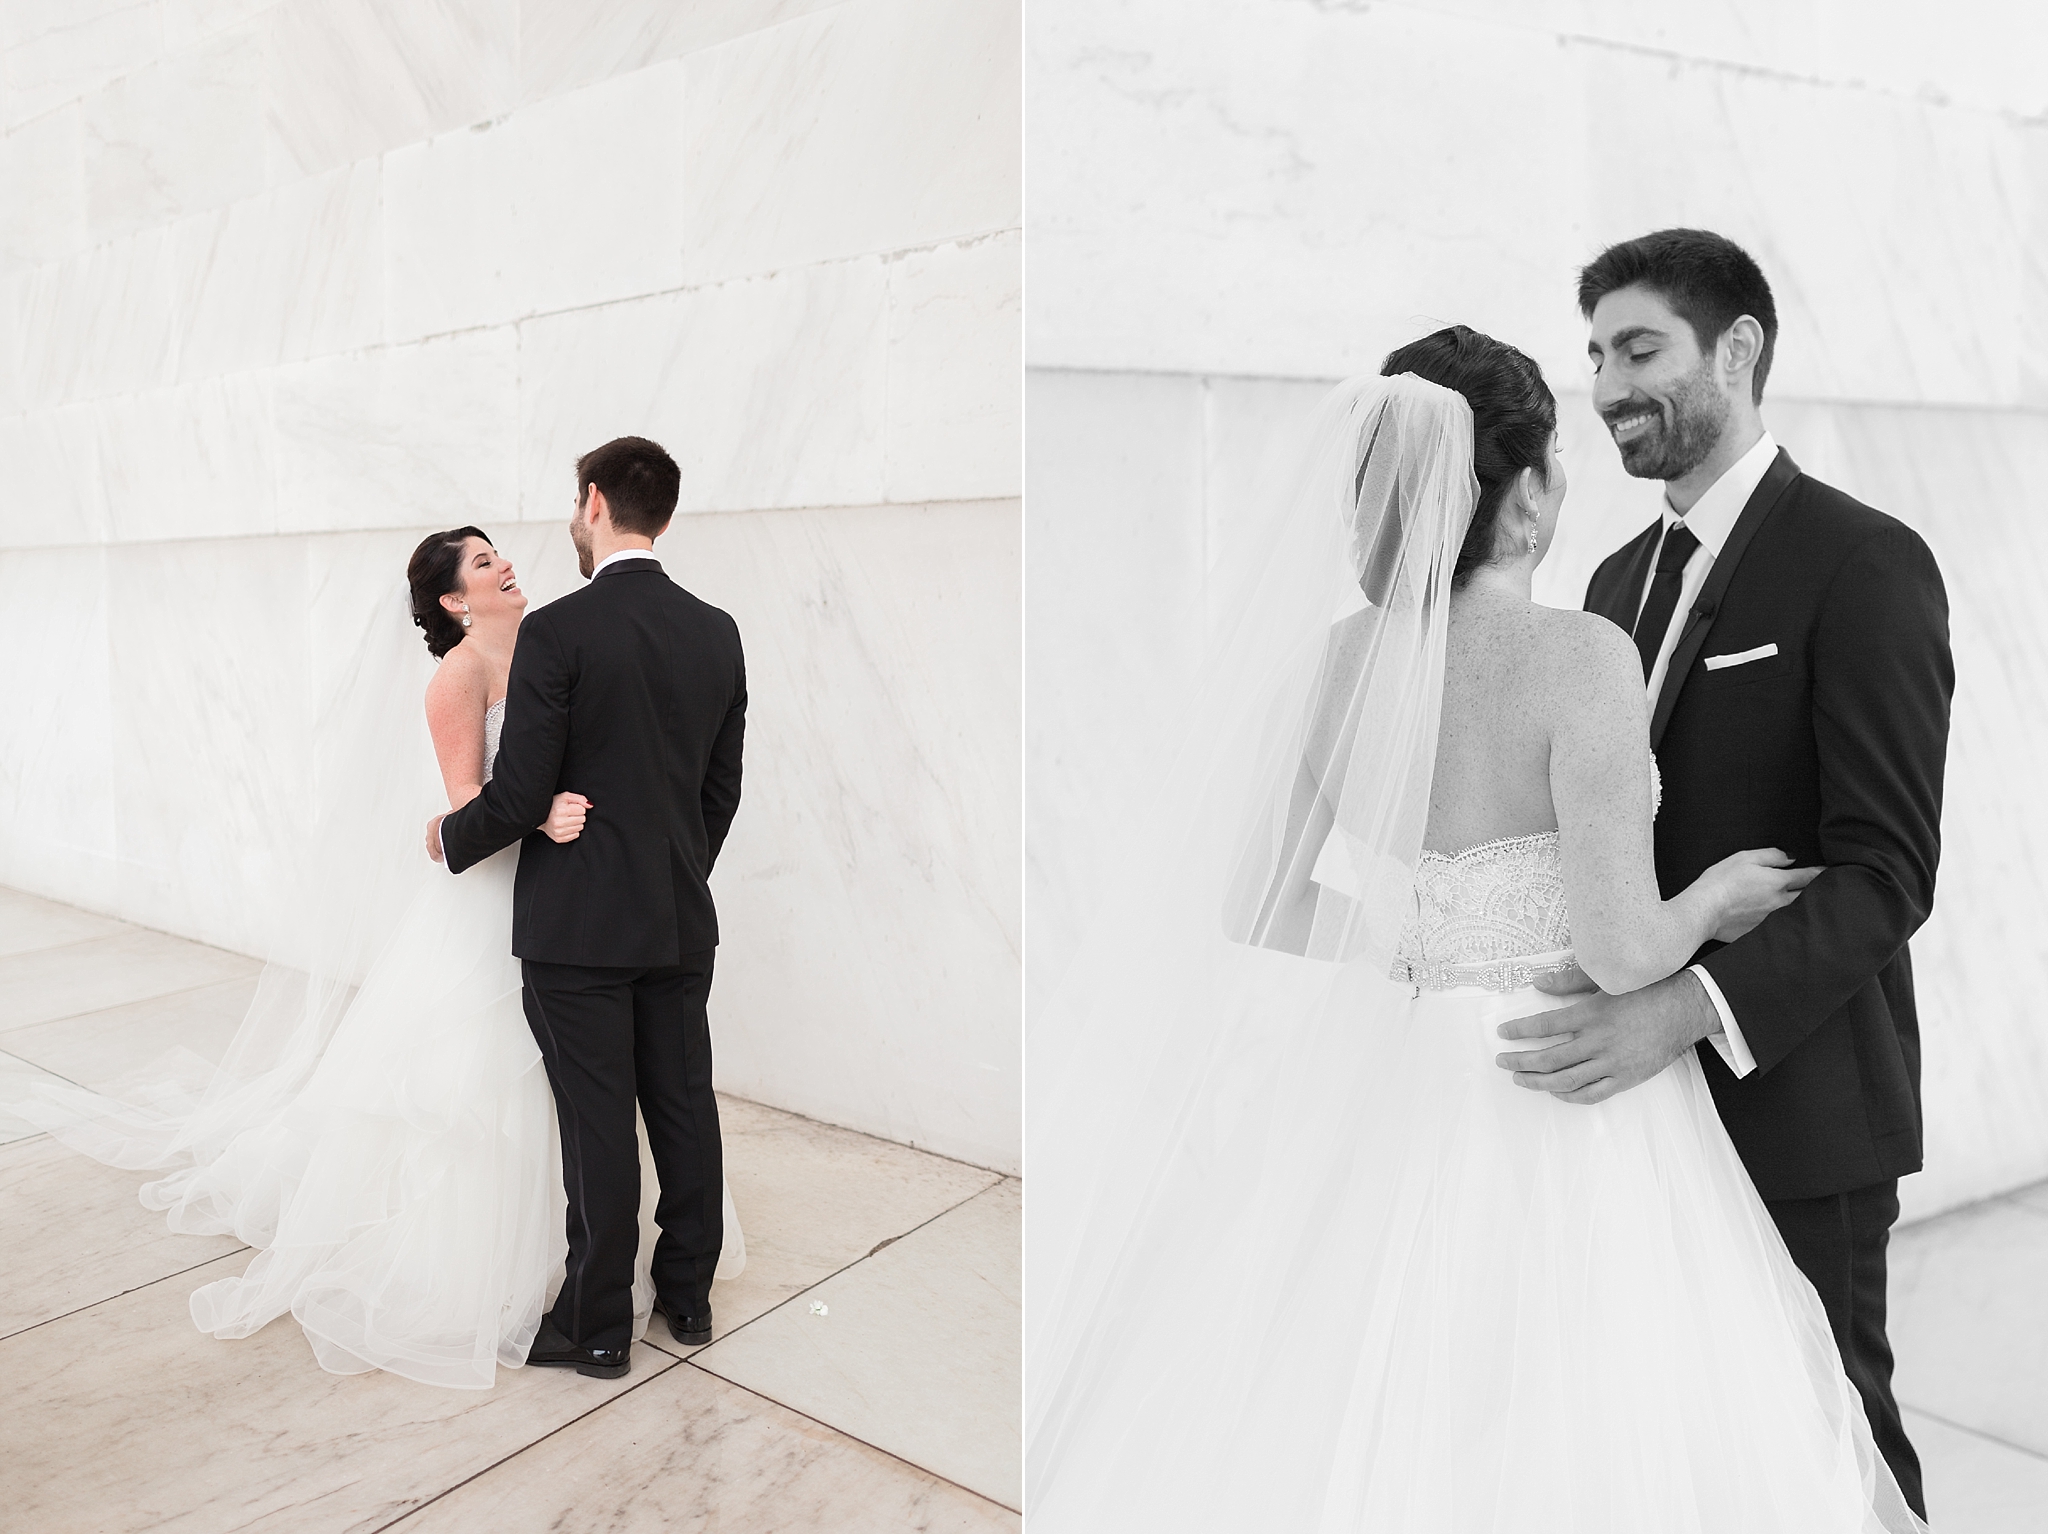 Washington, DC wedding photographer, Alicia Lacey, takes a look back on the best first looks of 2016.